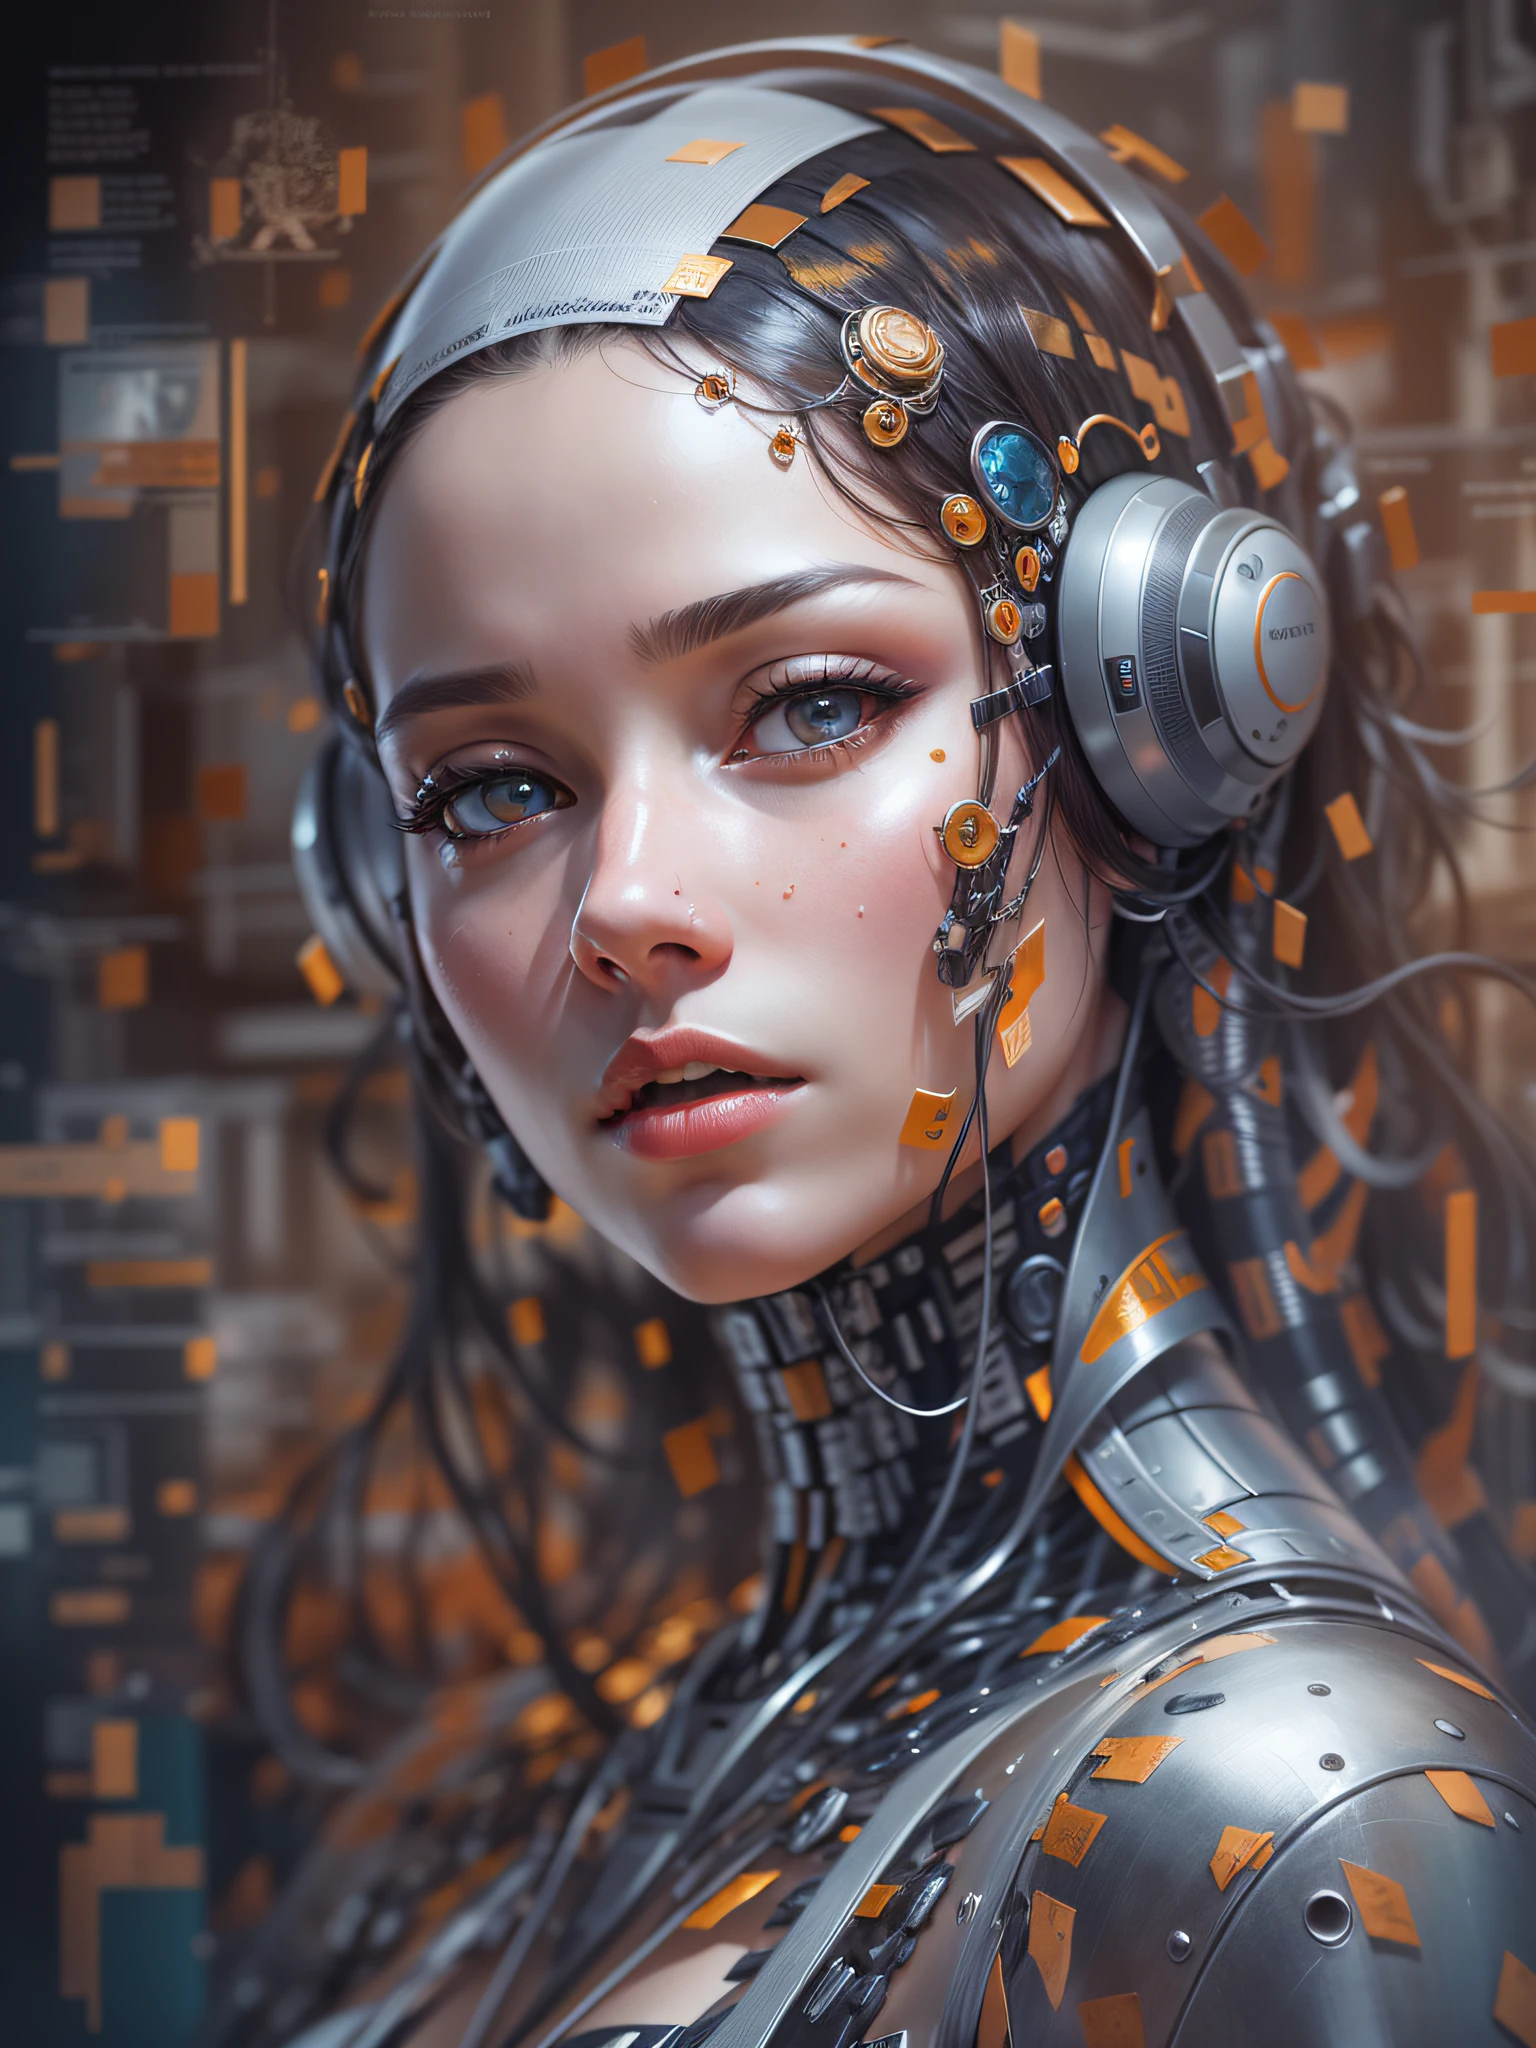 High-quality  design by the world's top AI artists, elegant and unique art, high resolution, photorealism, unparalleled beauty, fusion of AI and humans, humanoid, near-future art, revolutionary art, history best works of art, sexy,